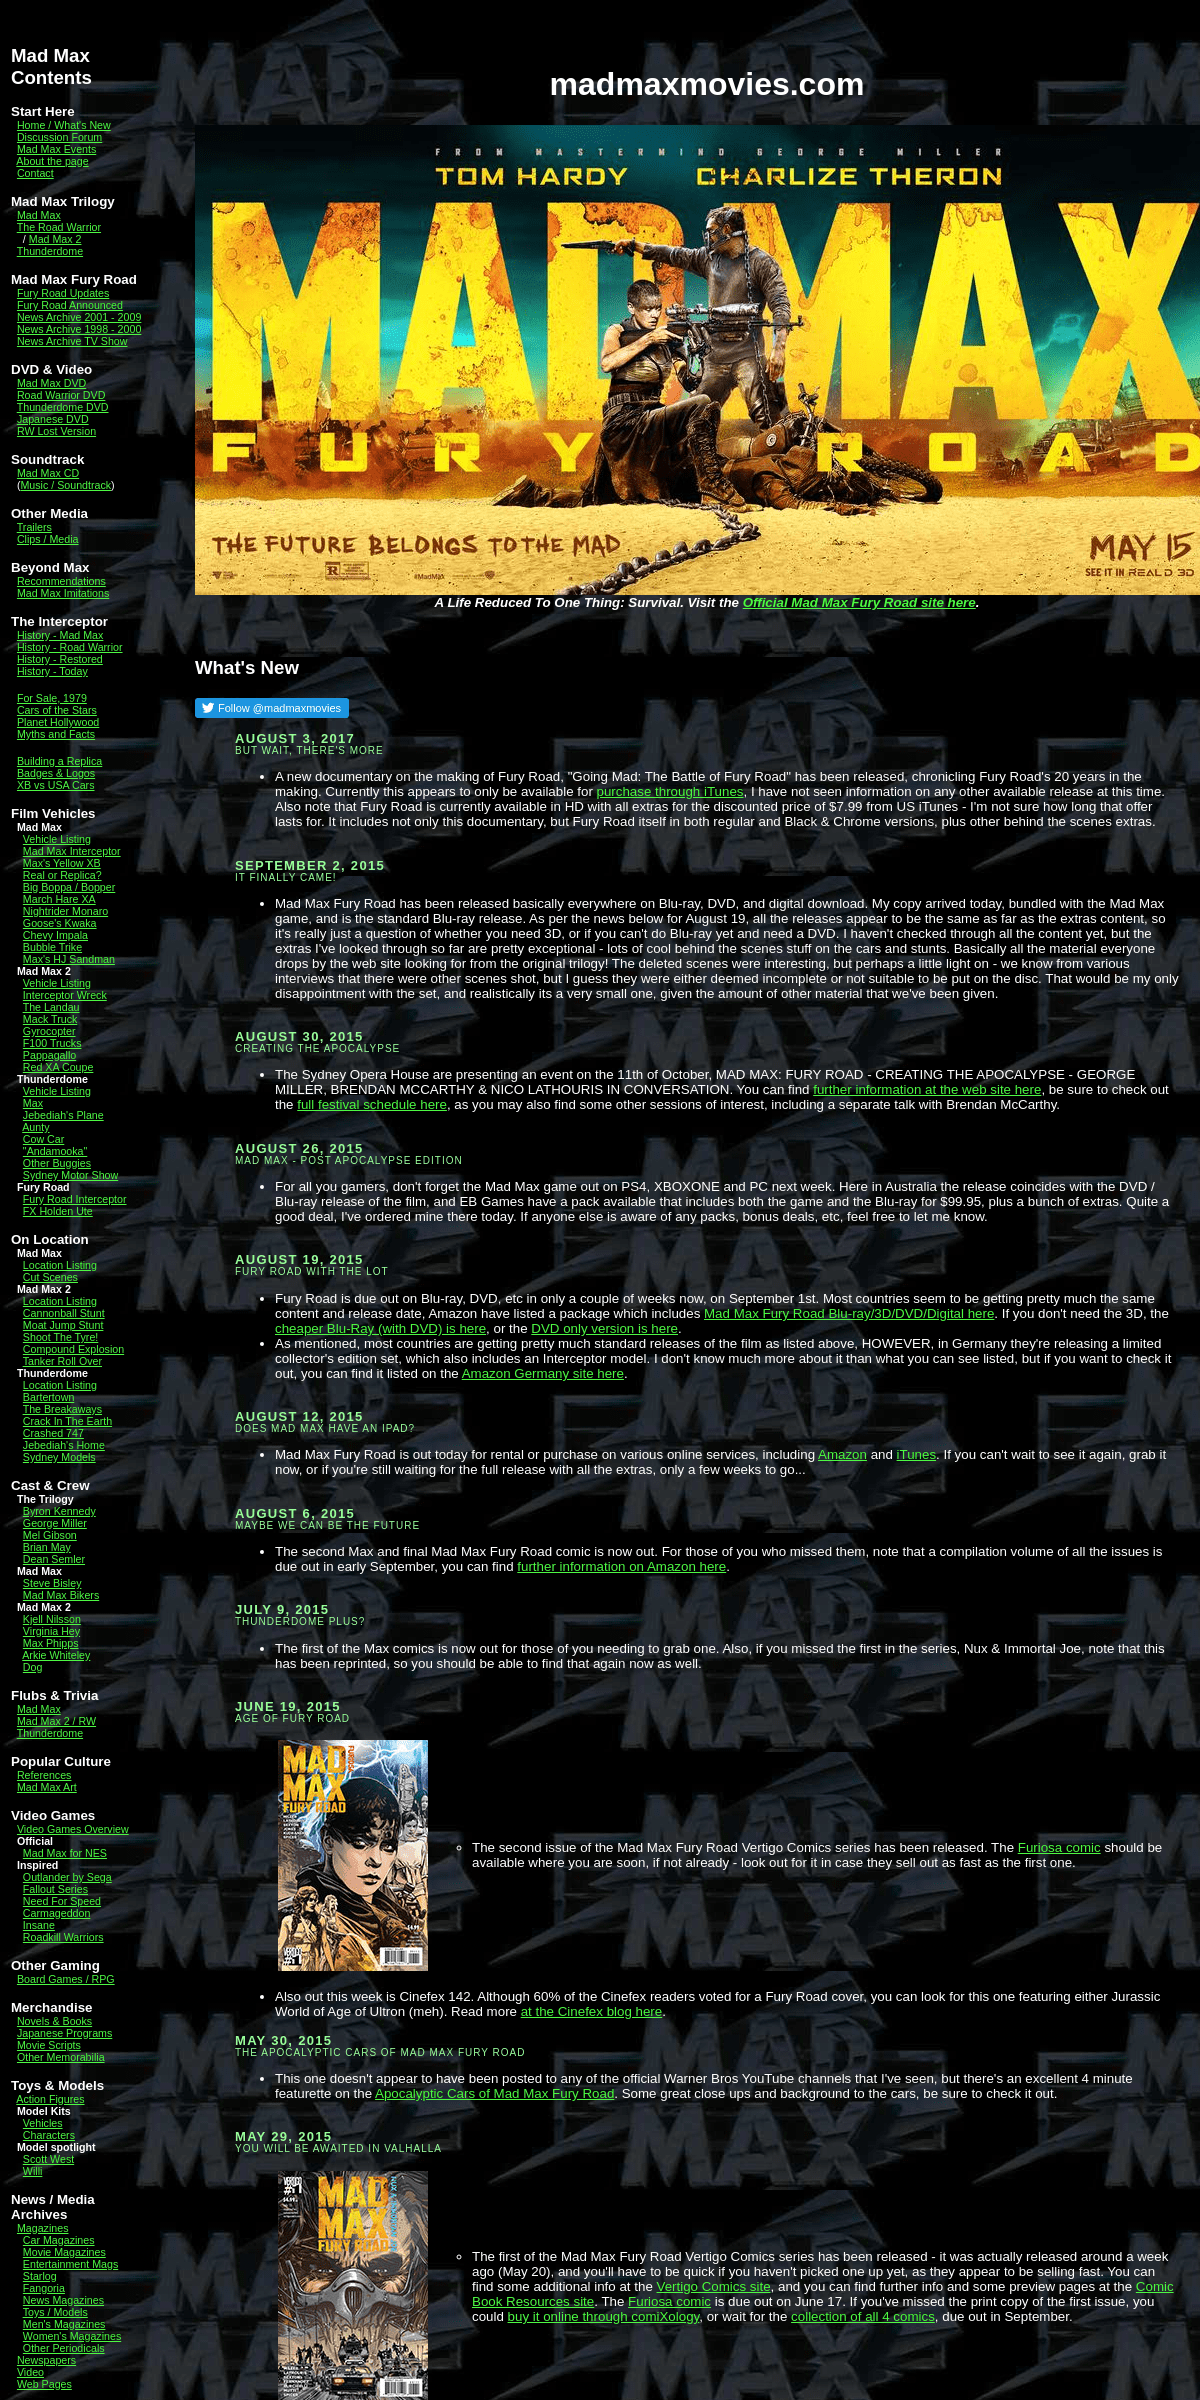 A complete backup of madmaxmovies.com